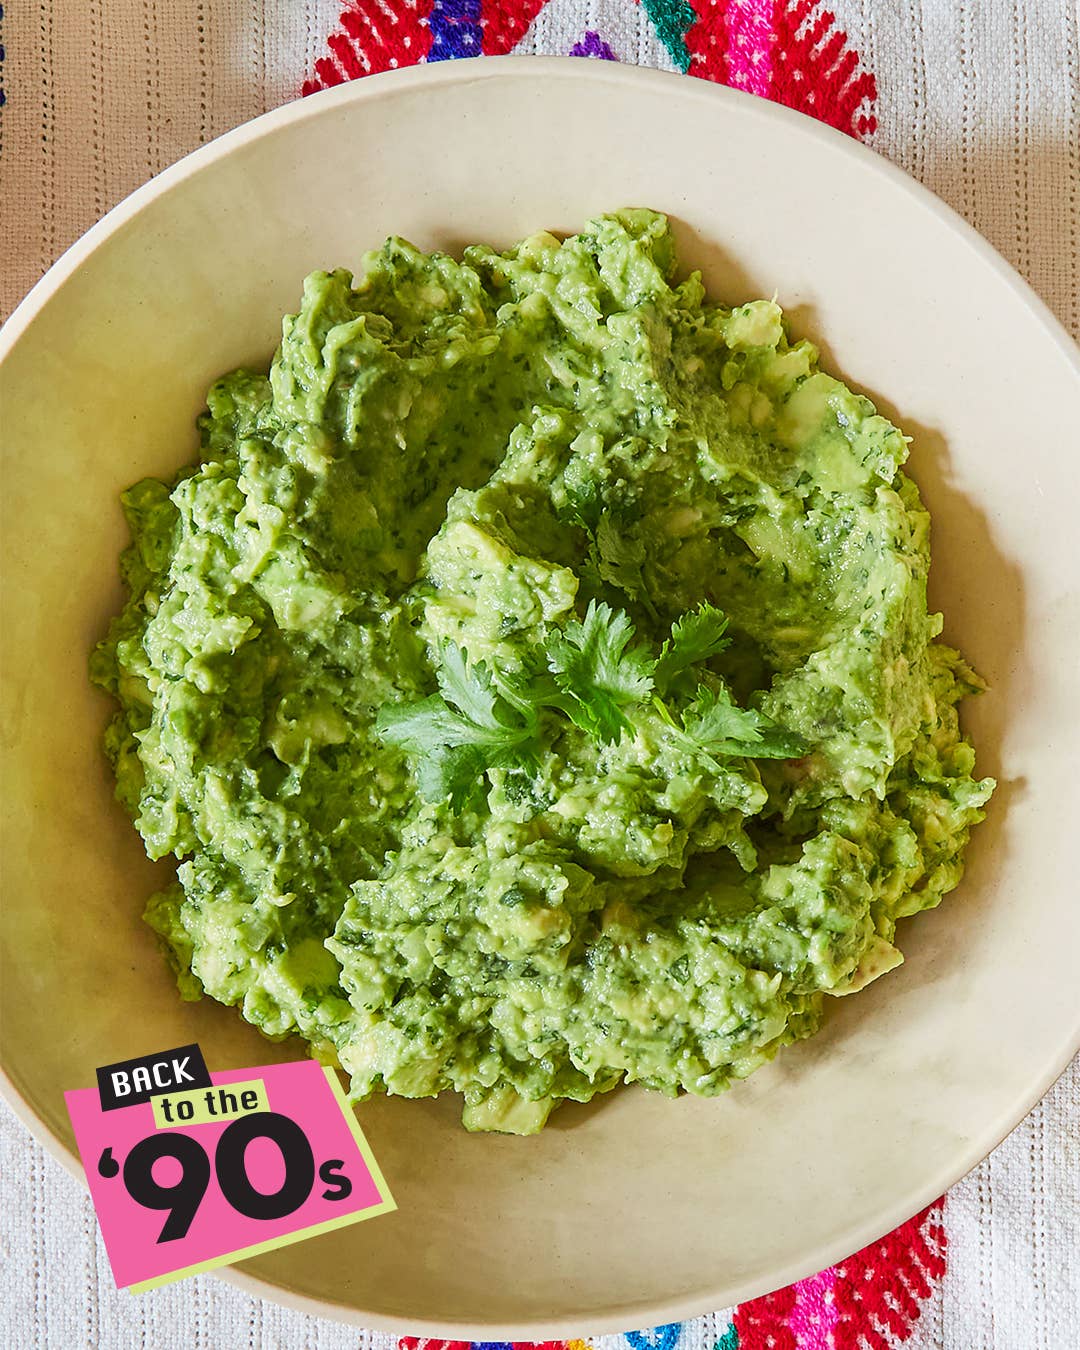 The Unlikely Origins of Tableside Guacamole